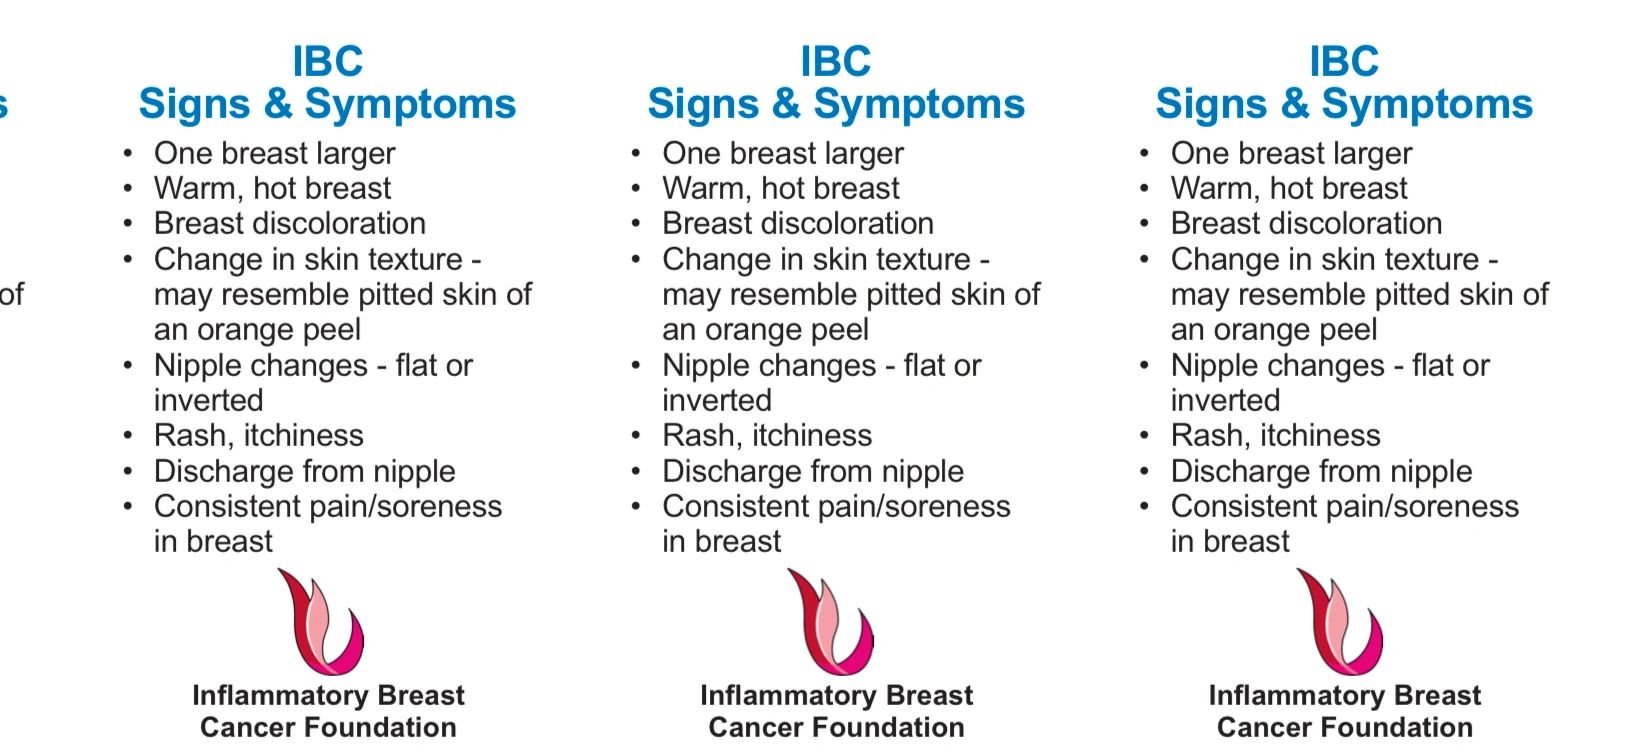 Inflammatory Breast Cancer: Signs, Symptoms, Causes & Treatment